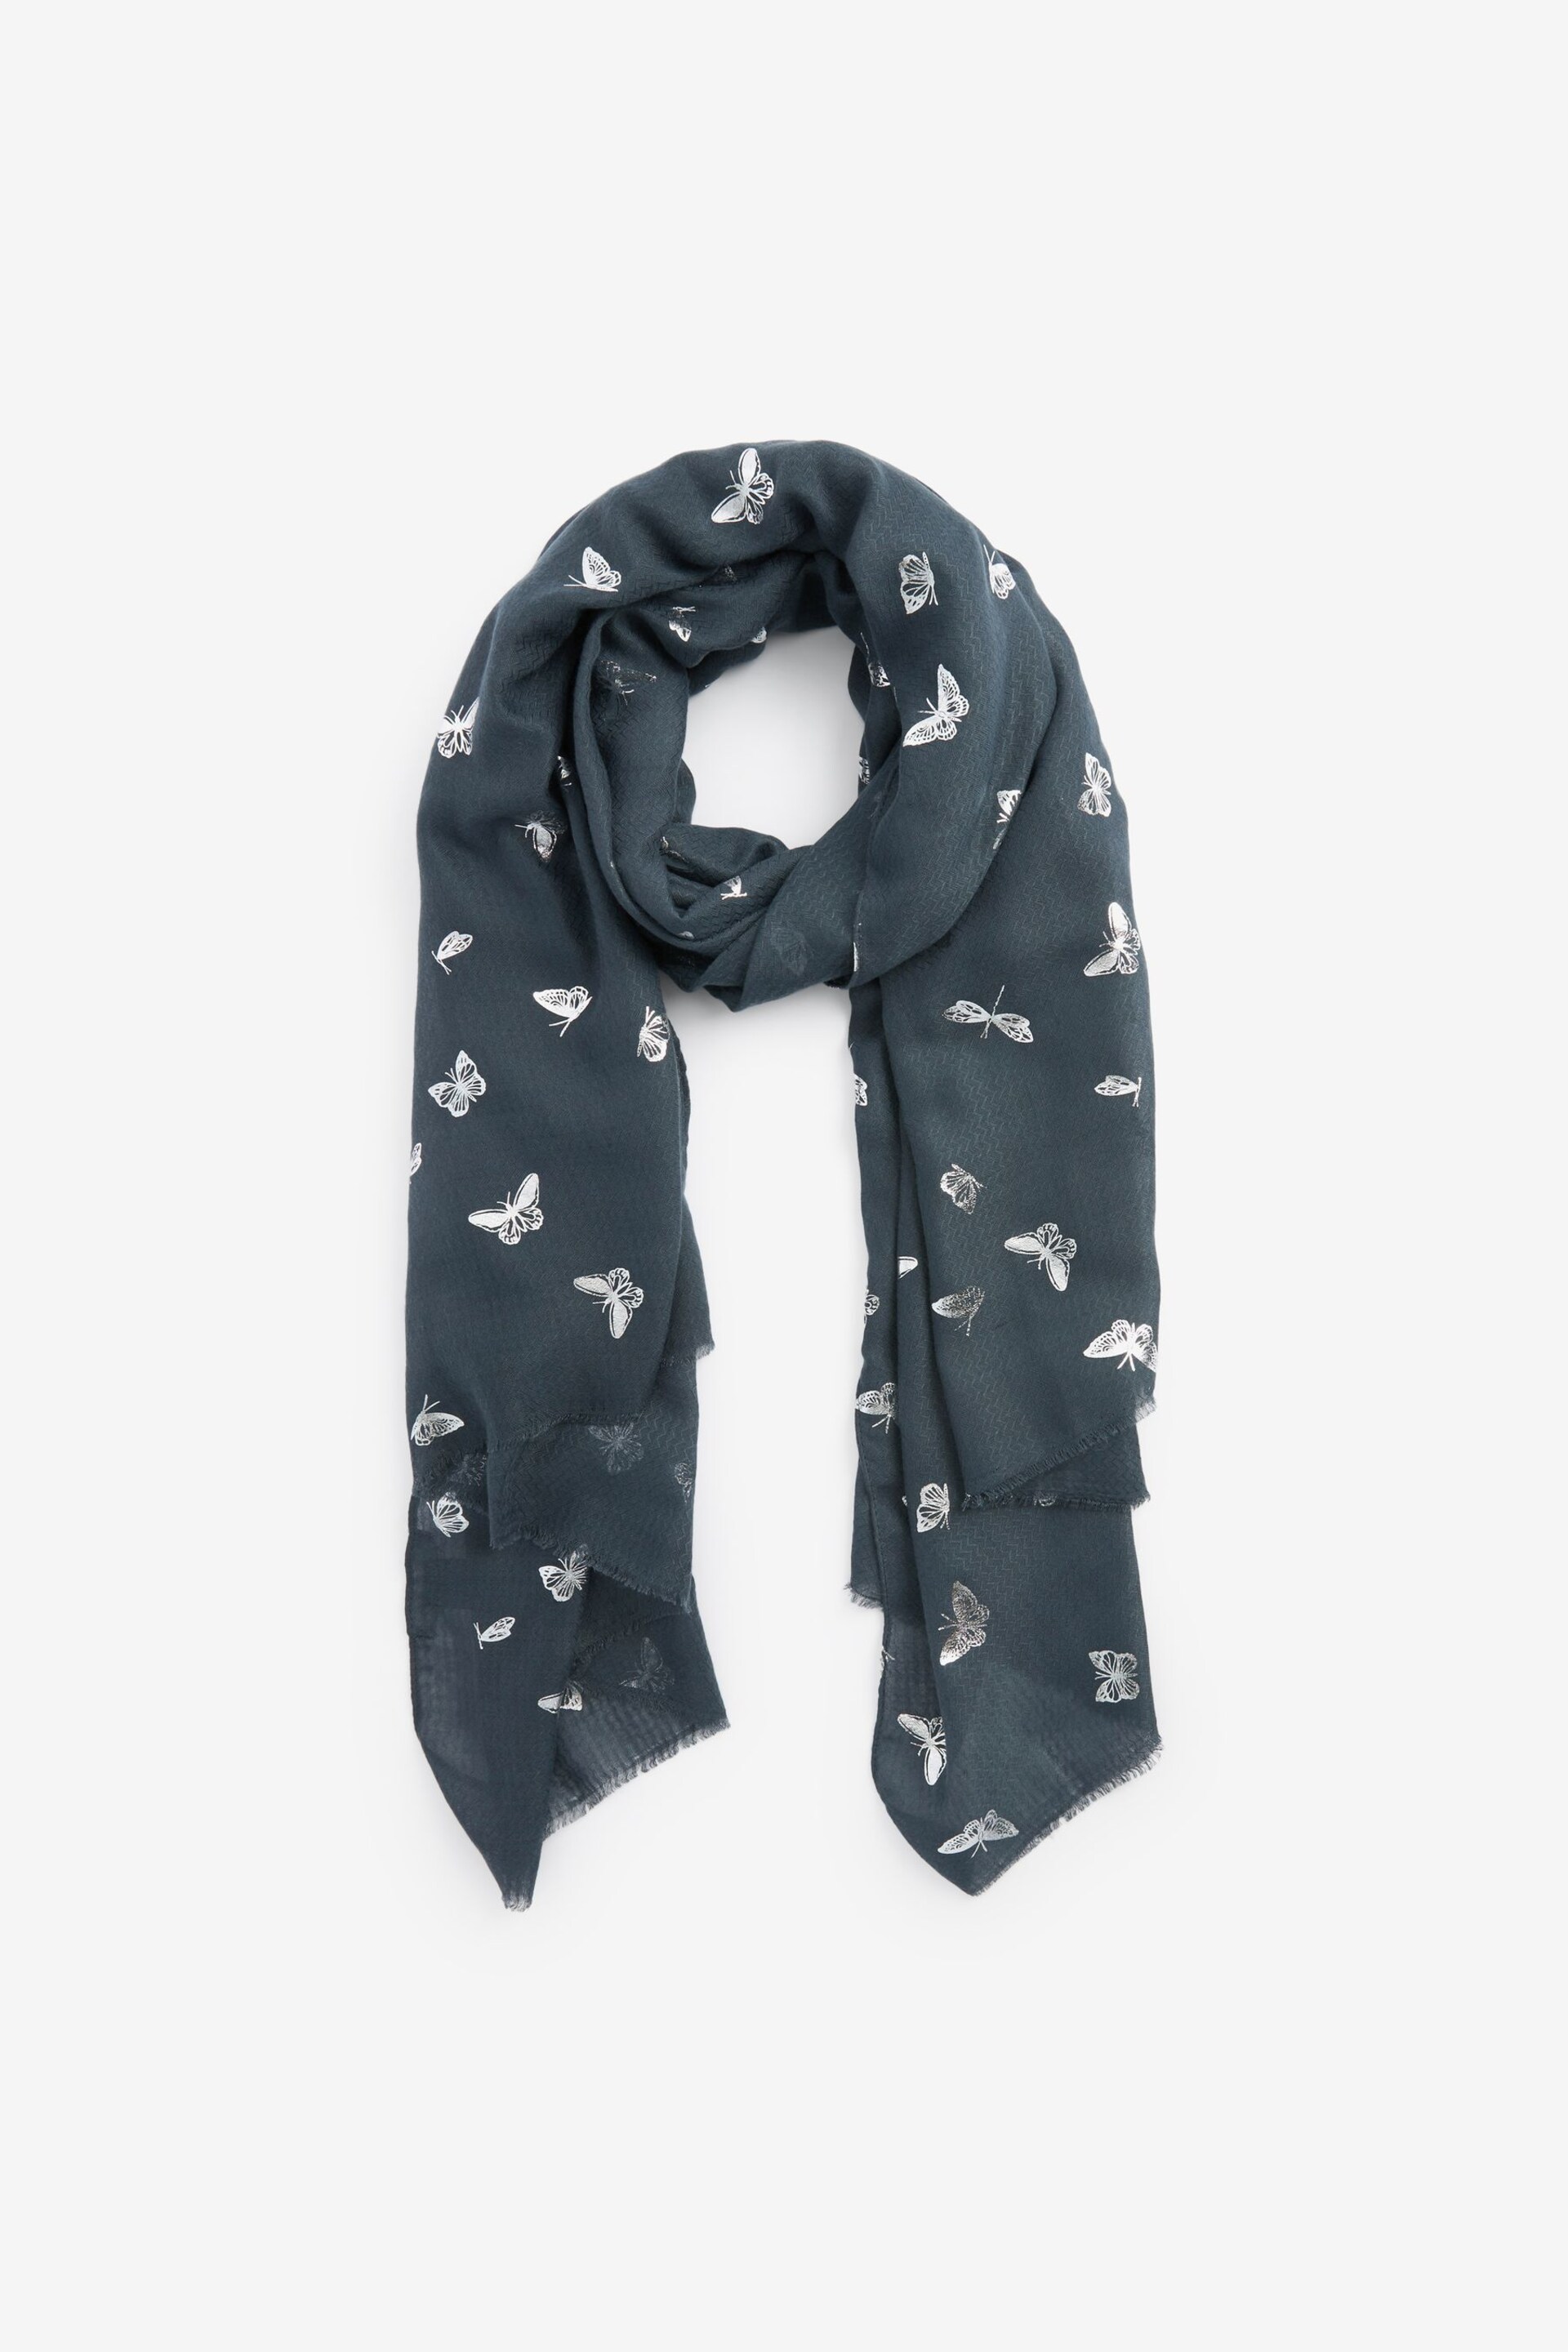 Charcoal Grey Butterfly Foil Lightweight Scarf - Image 3 of 4